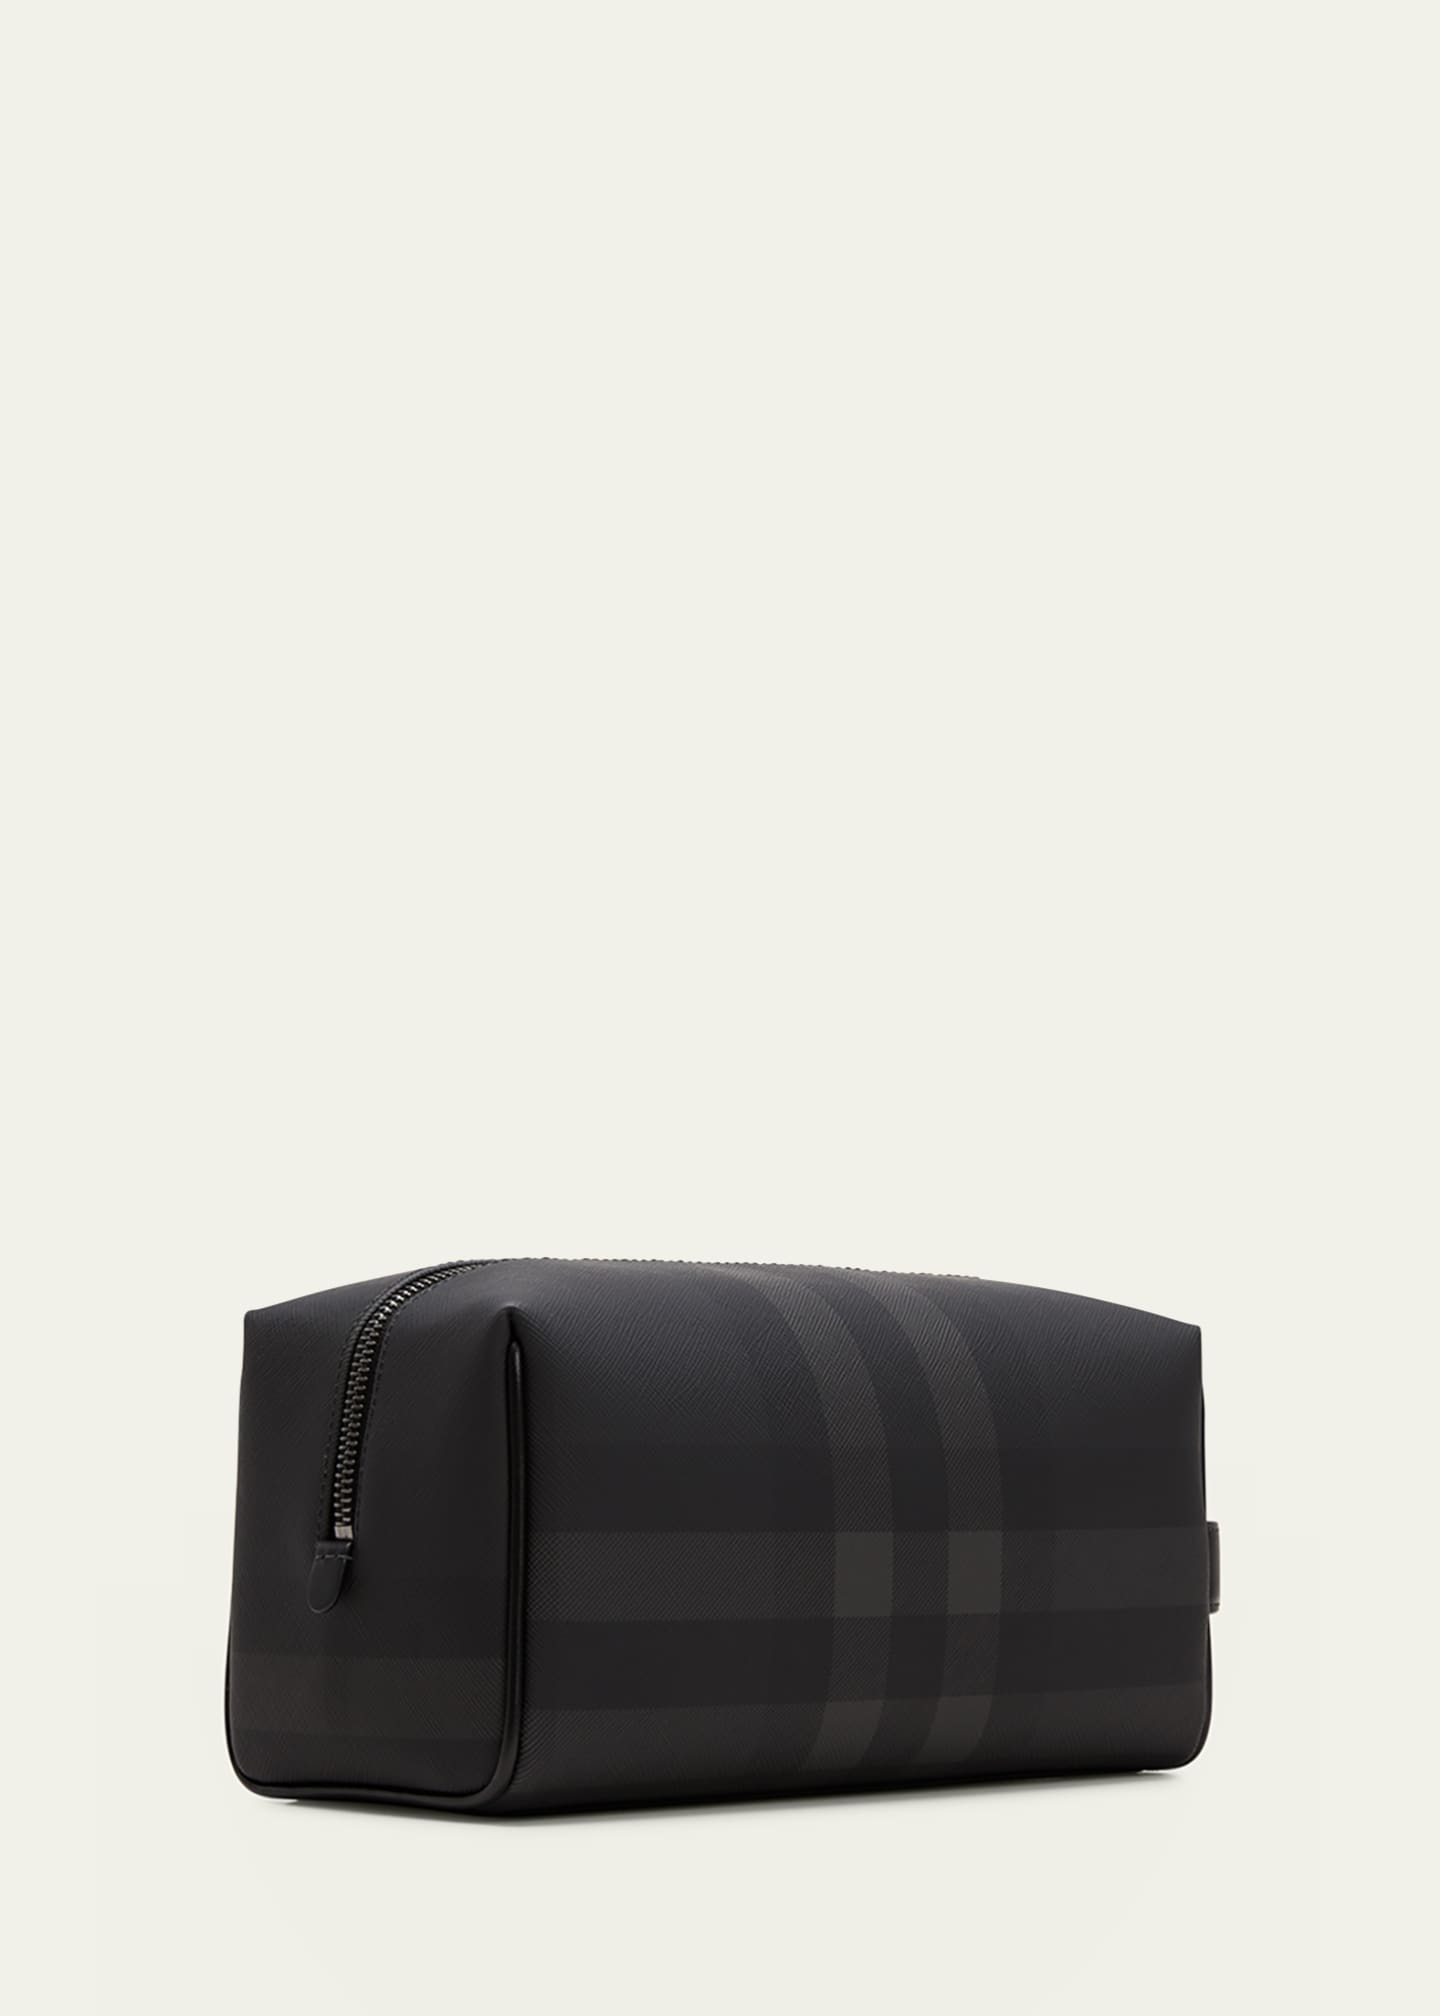 BURBERRY Check Leather Wallet Black